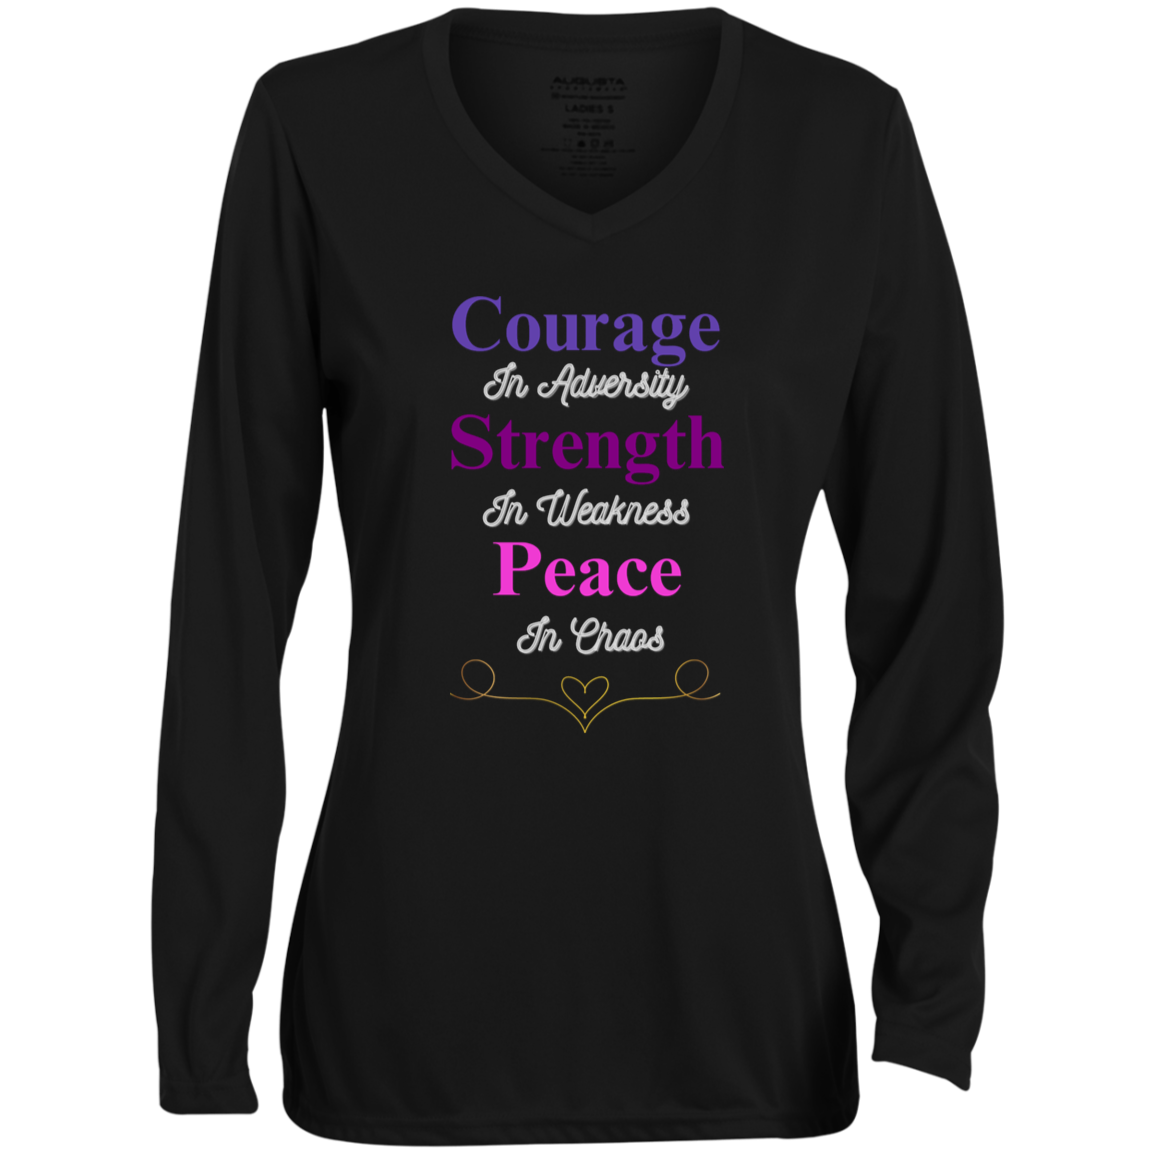 Courage in Adversity Women's Long Sleeve T-Shirt| Women's 100% Polyester Wicking Knit T-Shirt| Long Sleeve